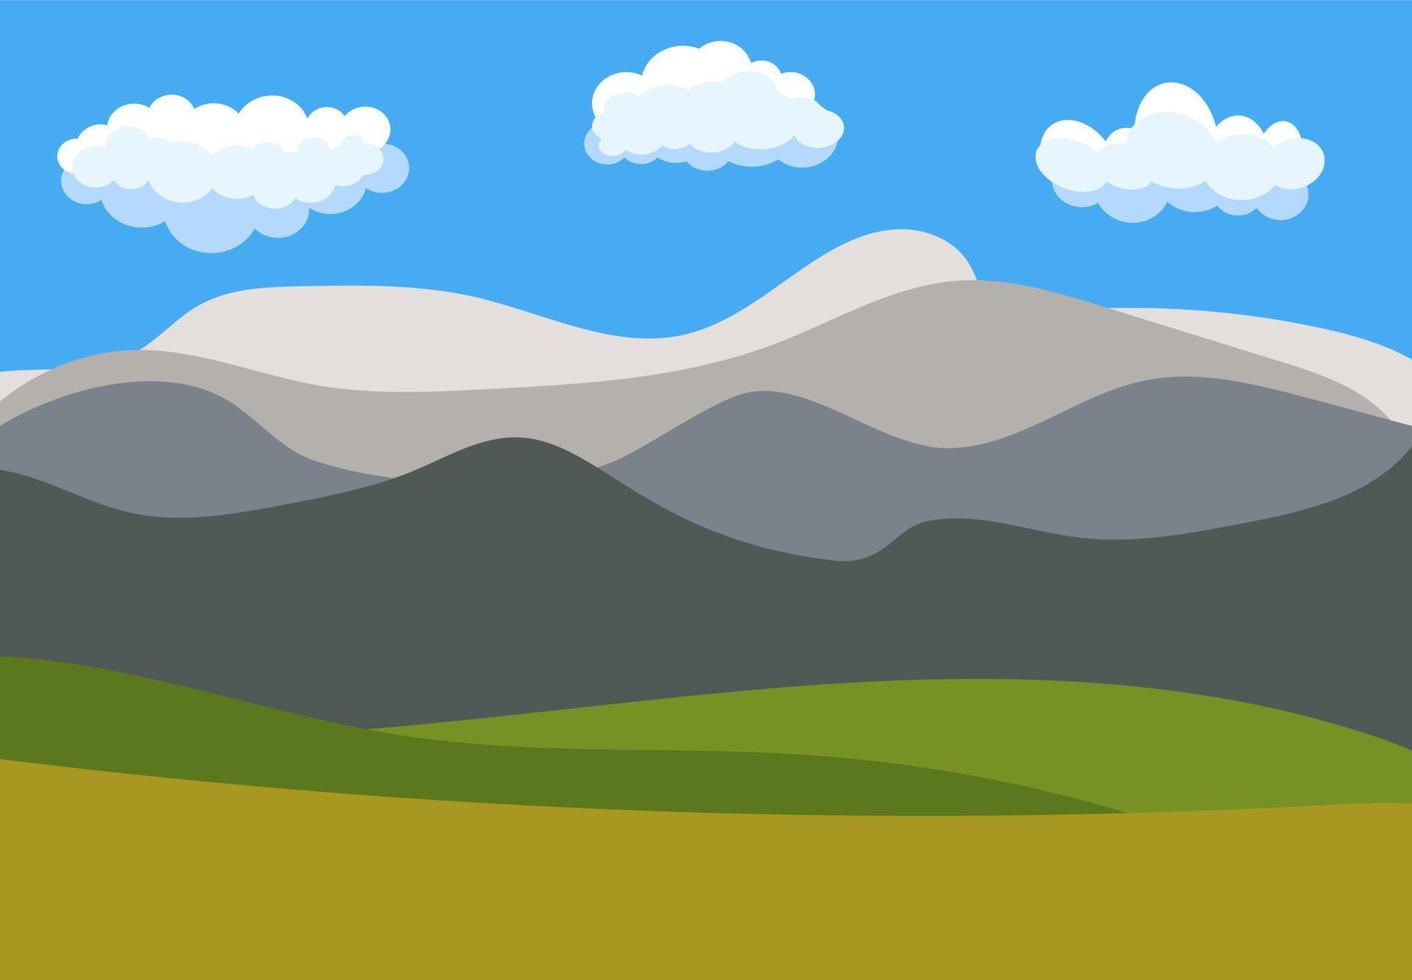 Natural cartoon landscape in the flat style with blue sky, clouds, hills and mountains. Vector illustration